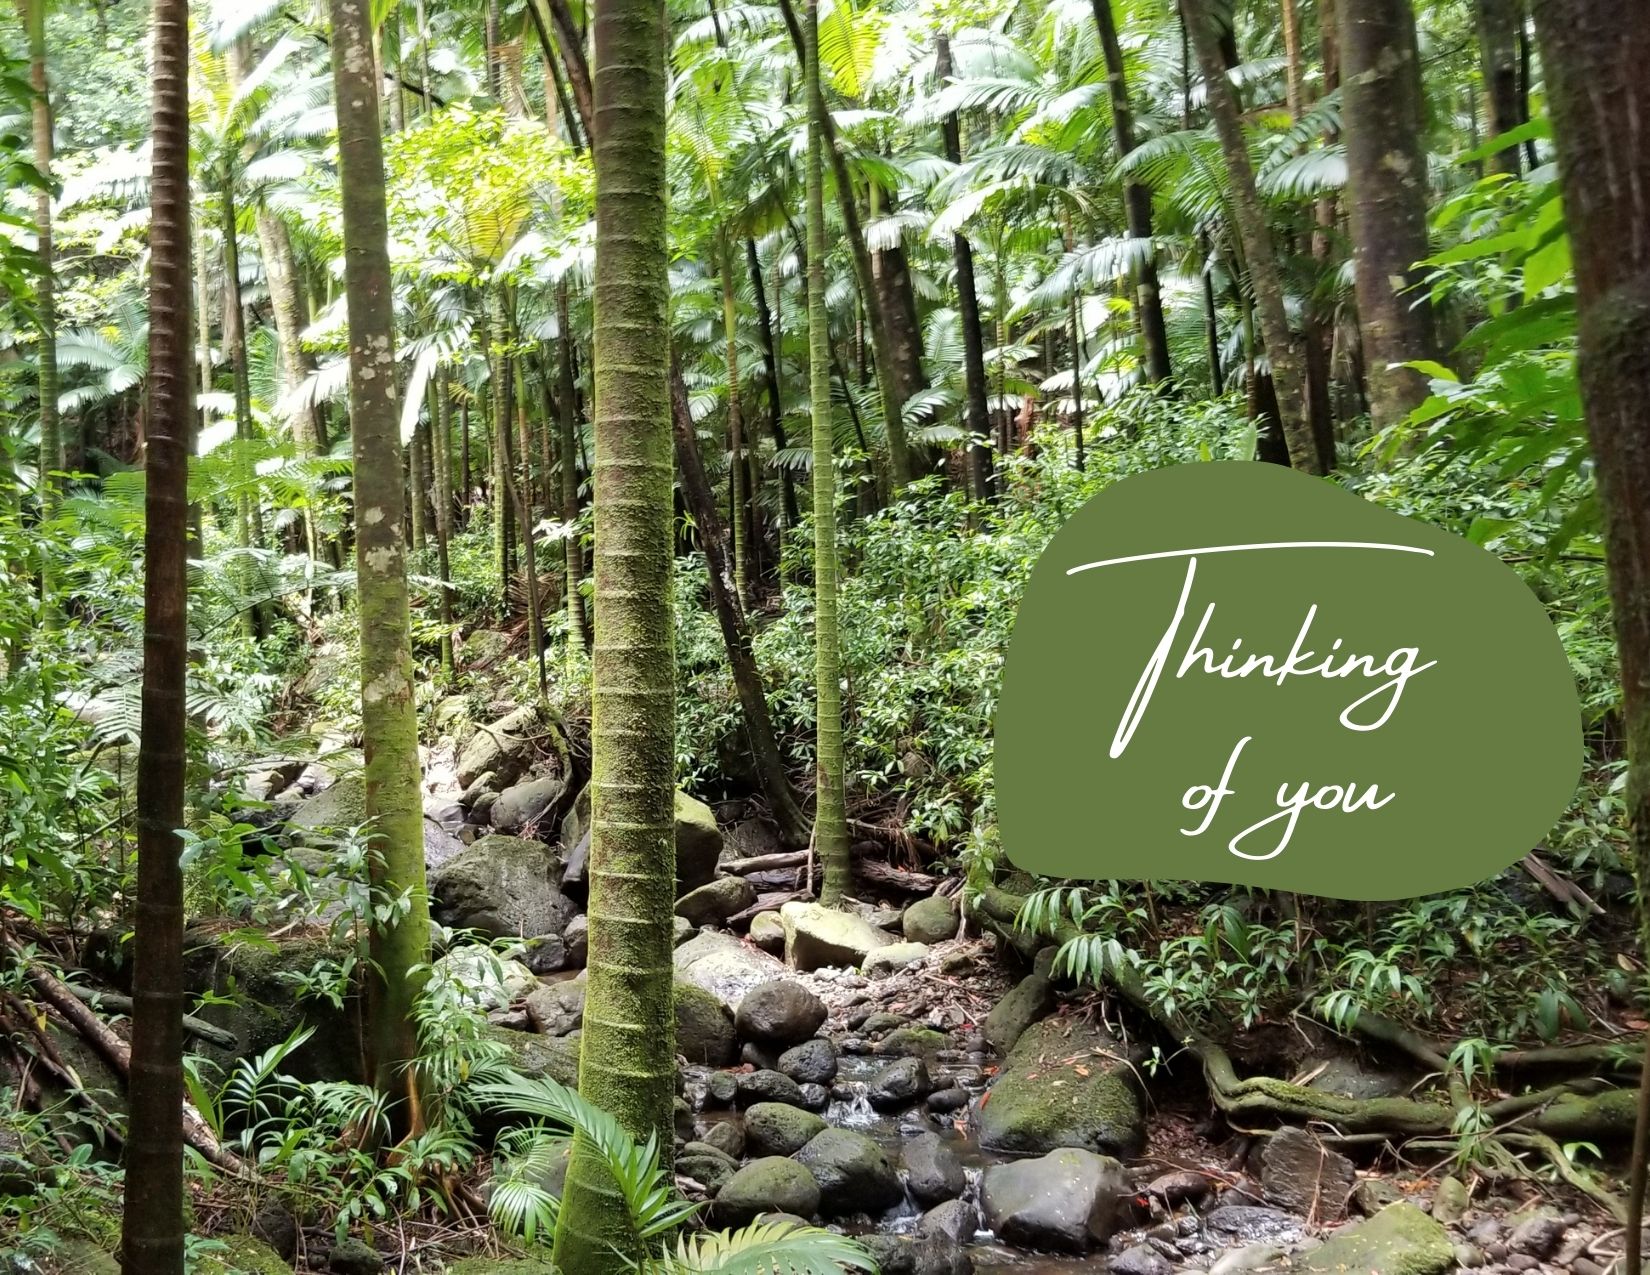 landscape of palm trees in front of a streambed. The text "Thinking of you" is superimposed on the photo